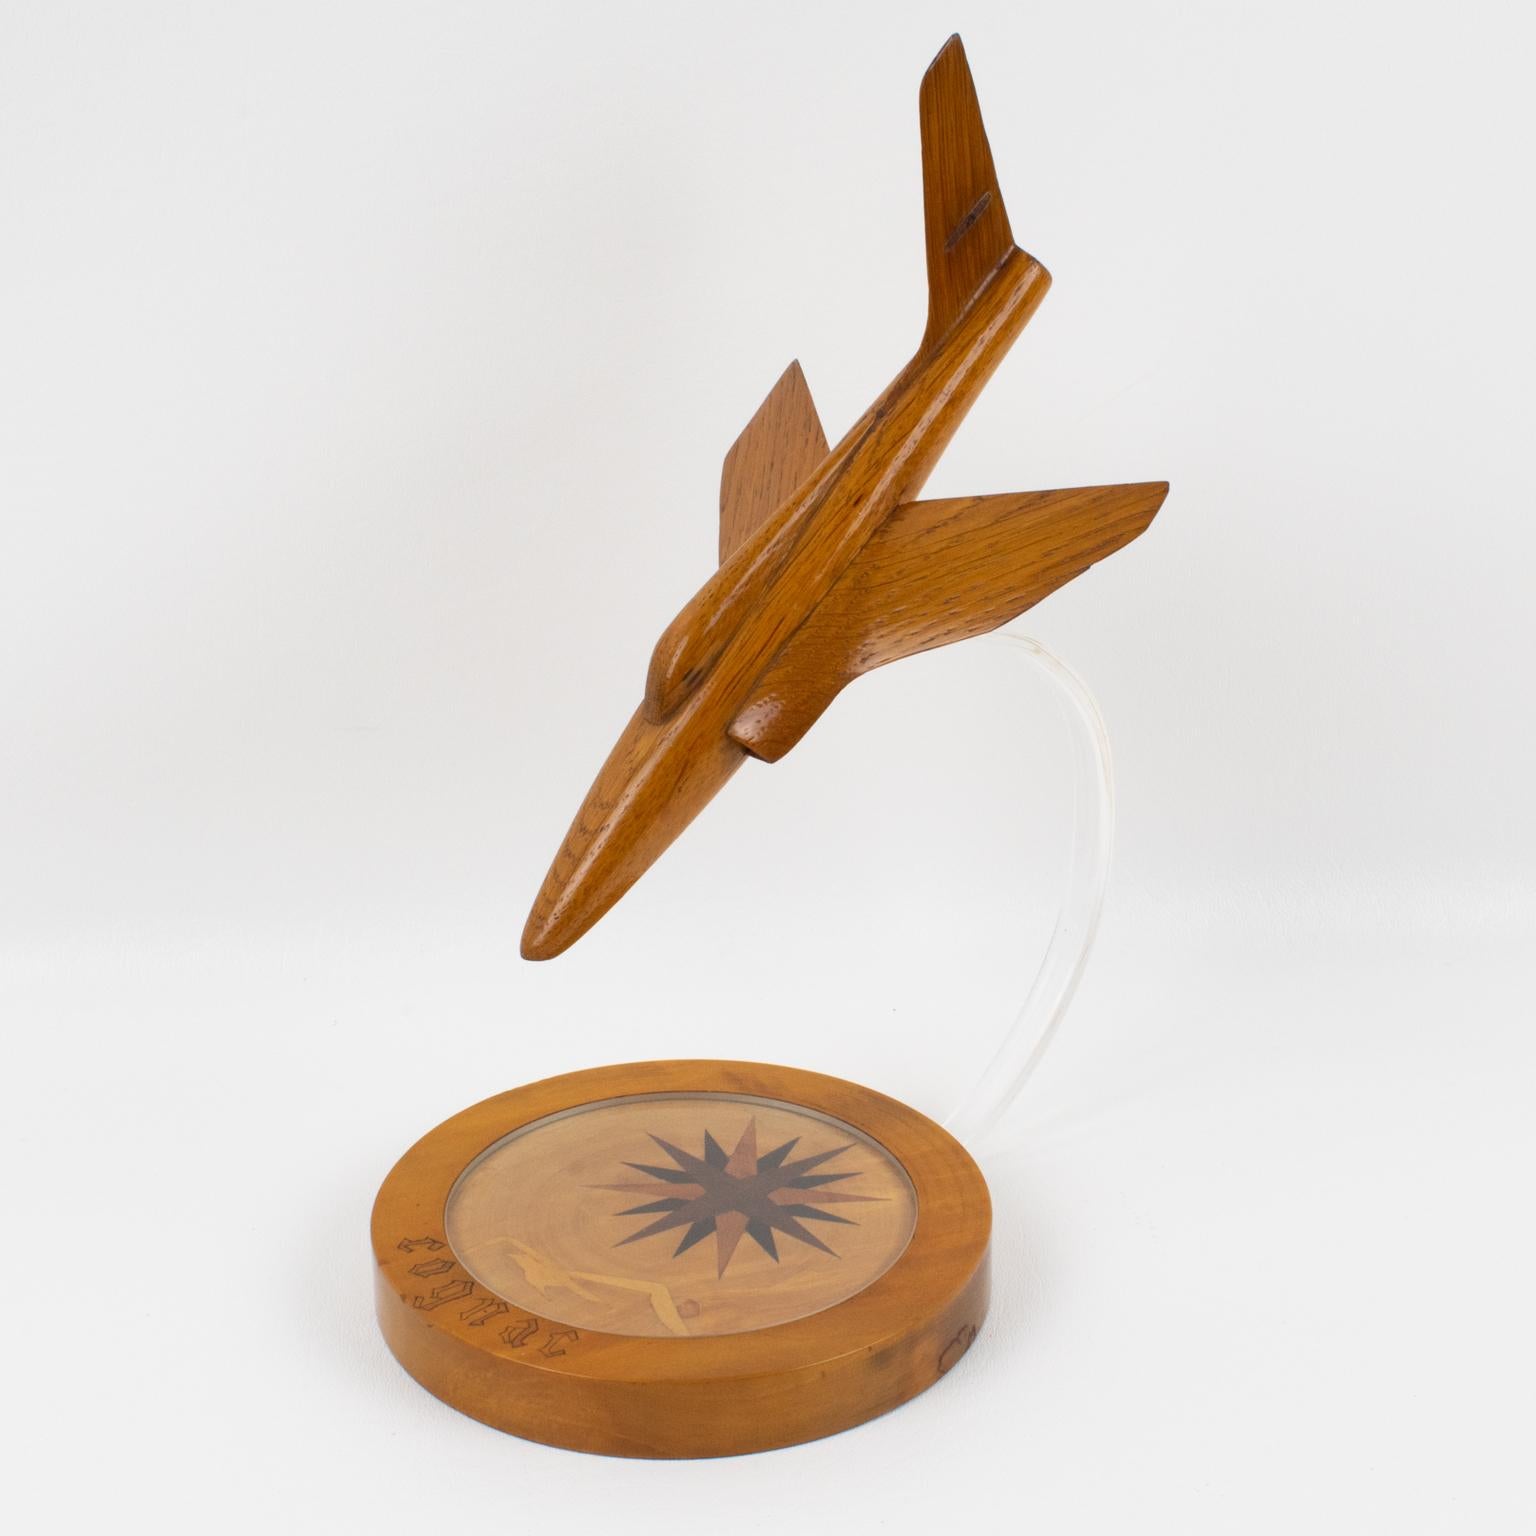 A stunning hand-made oak sculpture aviation model featuring a jet airplane. Rounded stepped oak wood base with compass marquetry, a flying albatross bird, and marked 